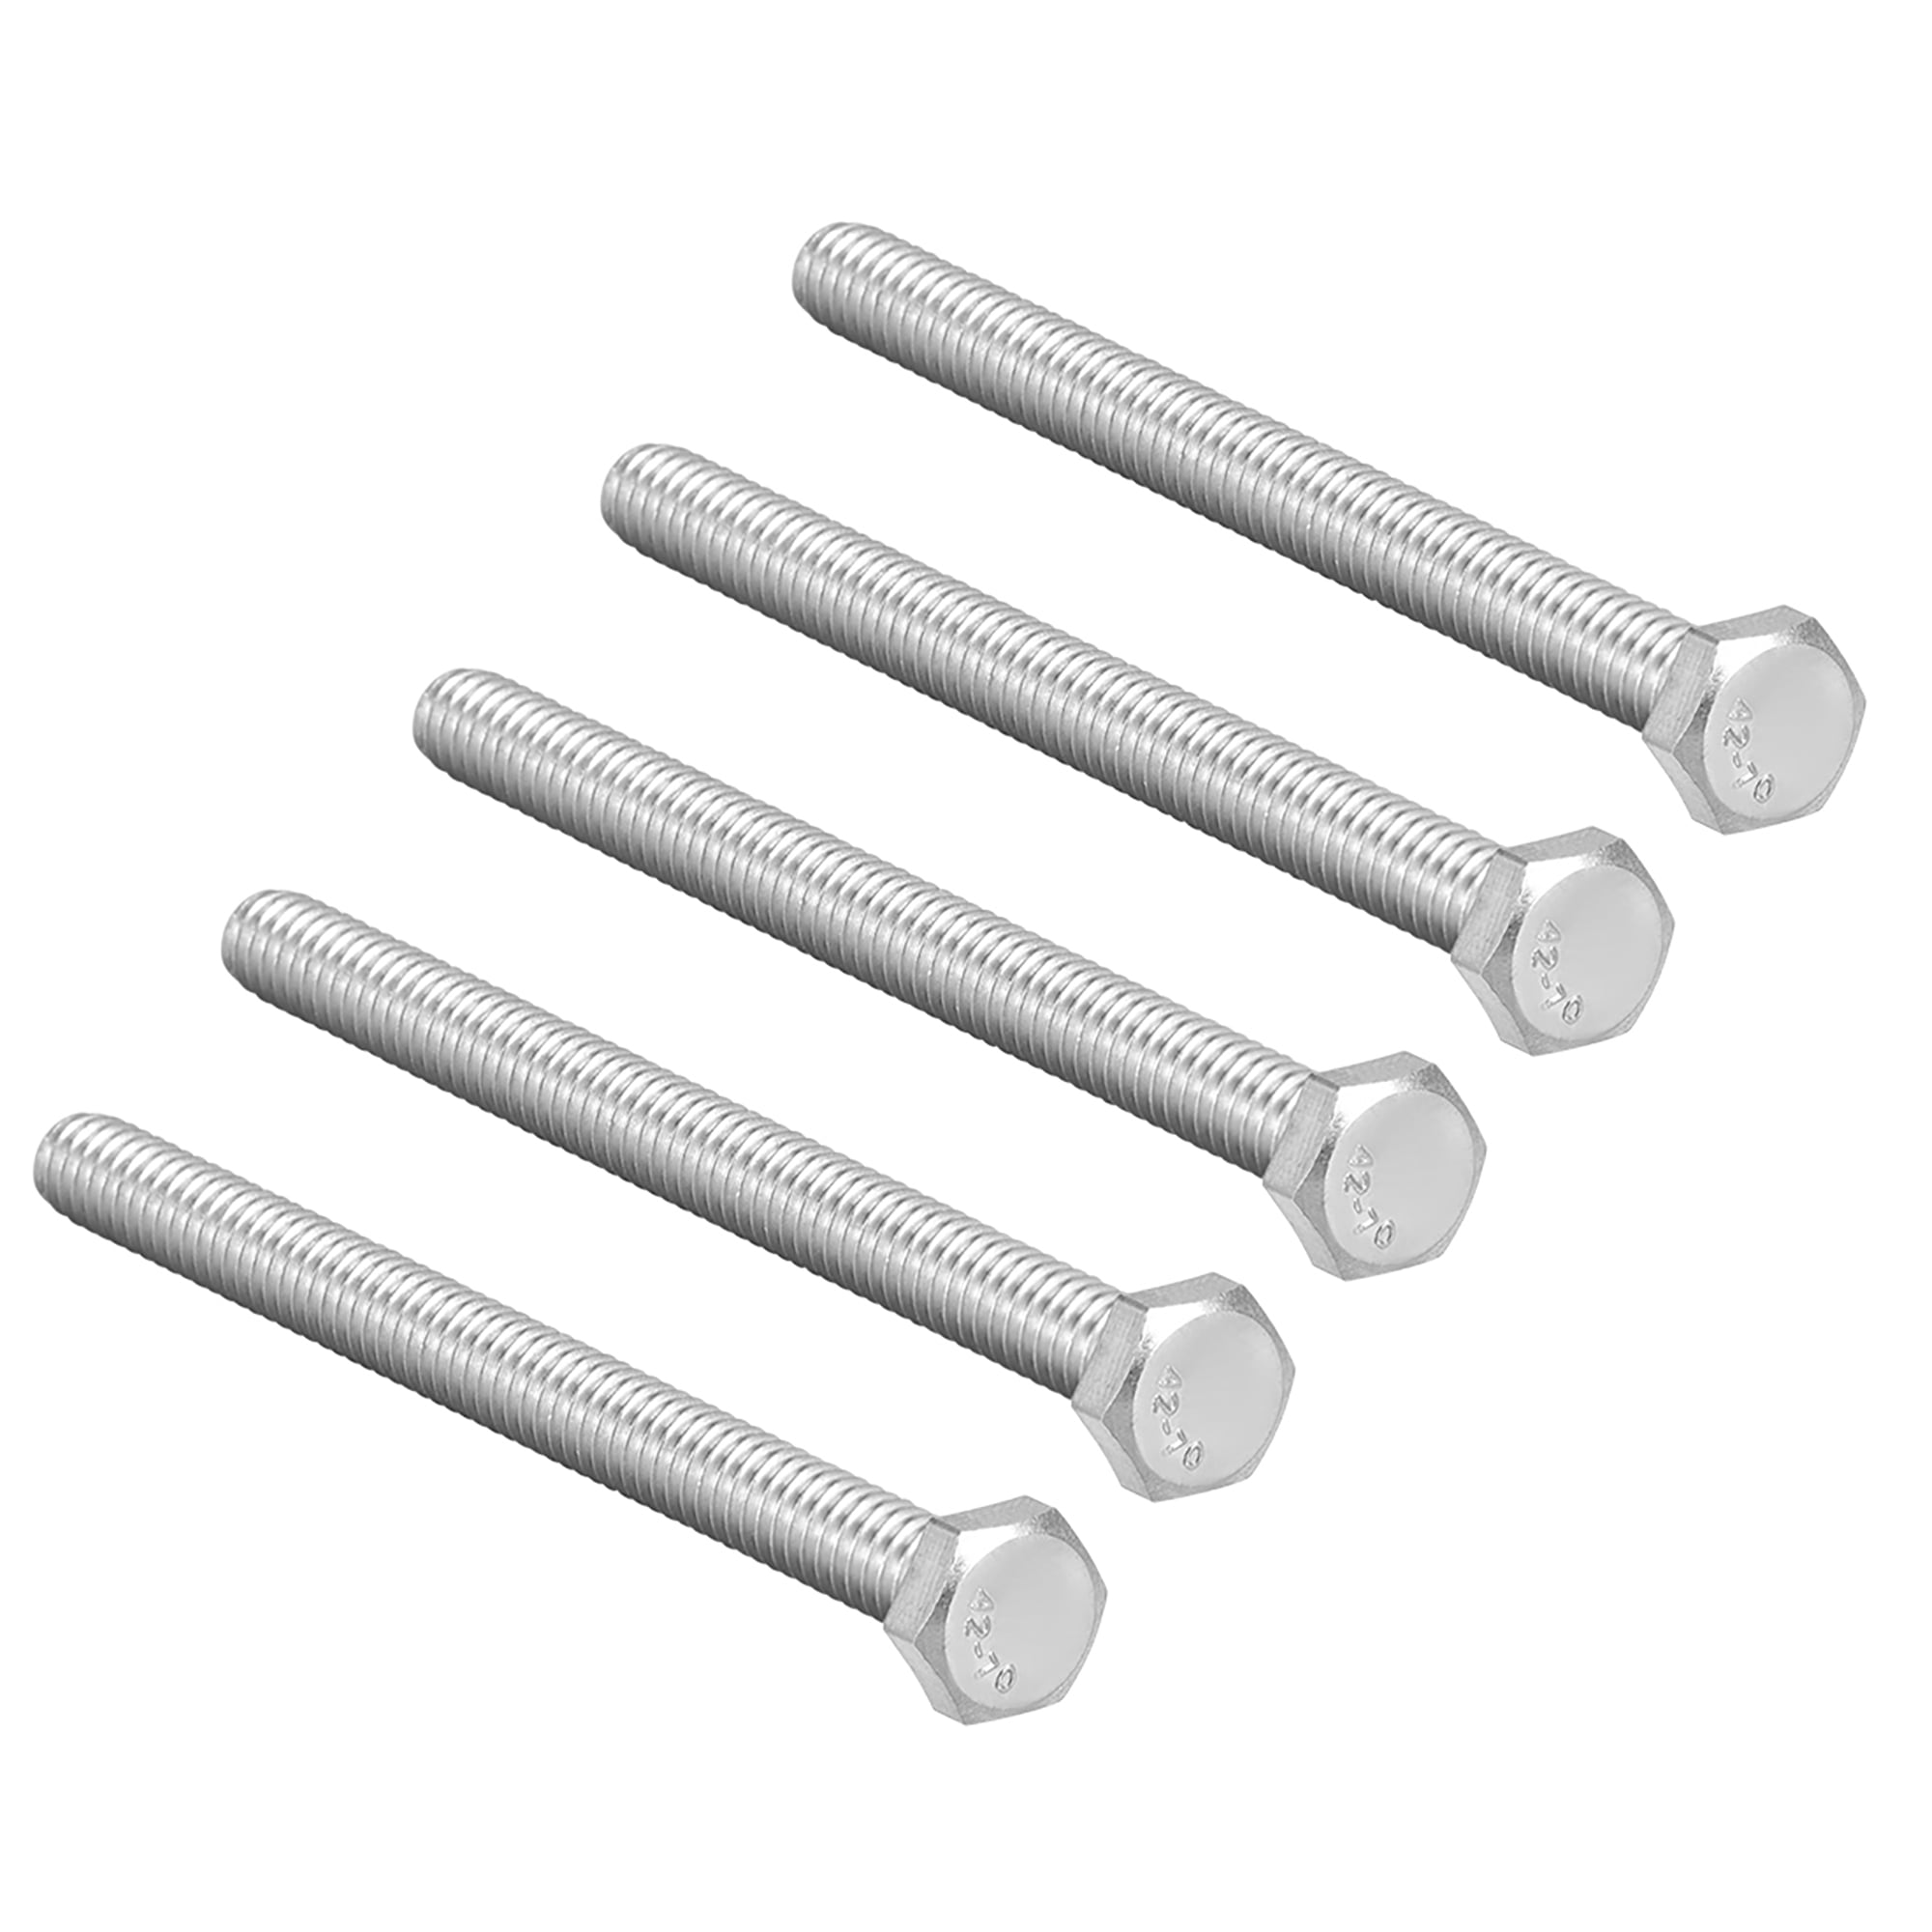 M6 Stainless Steel Bolts and Nuts with Washers A2 Stainless Pack of 6 12 or 24 